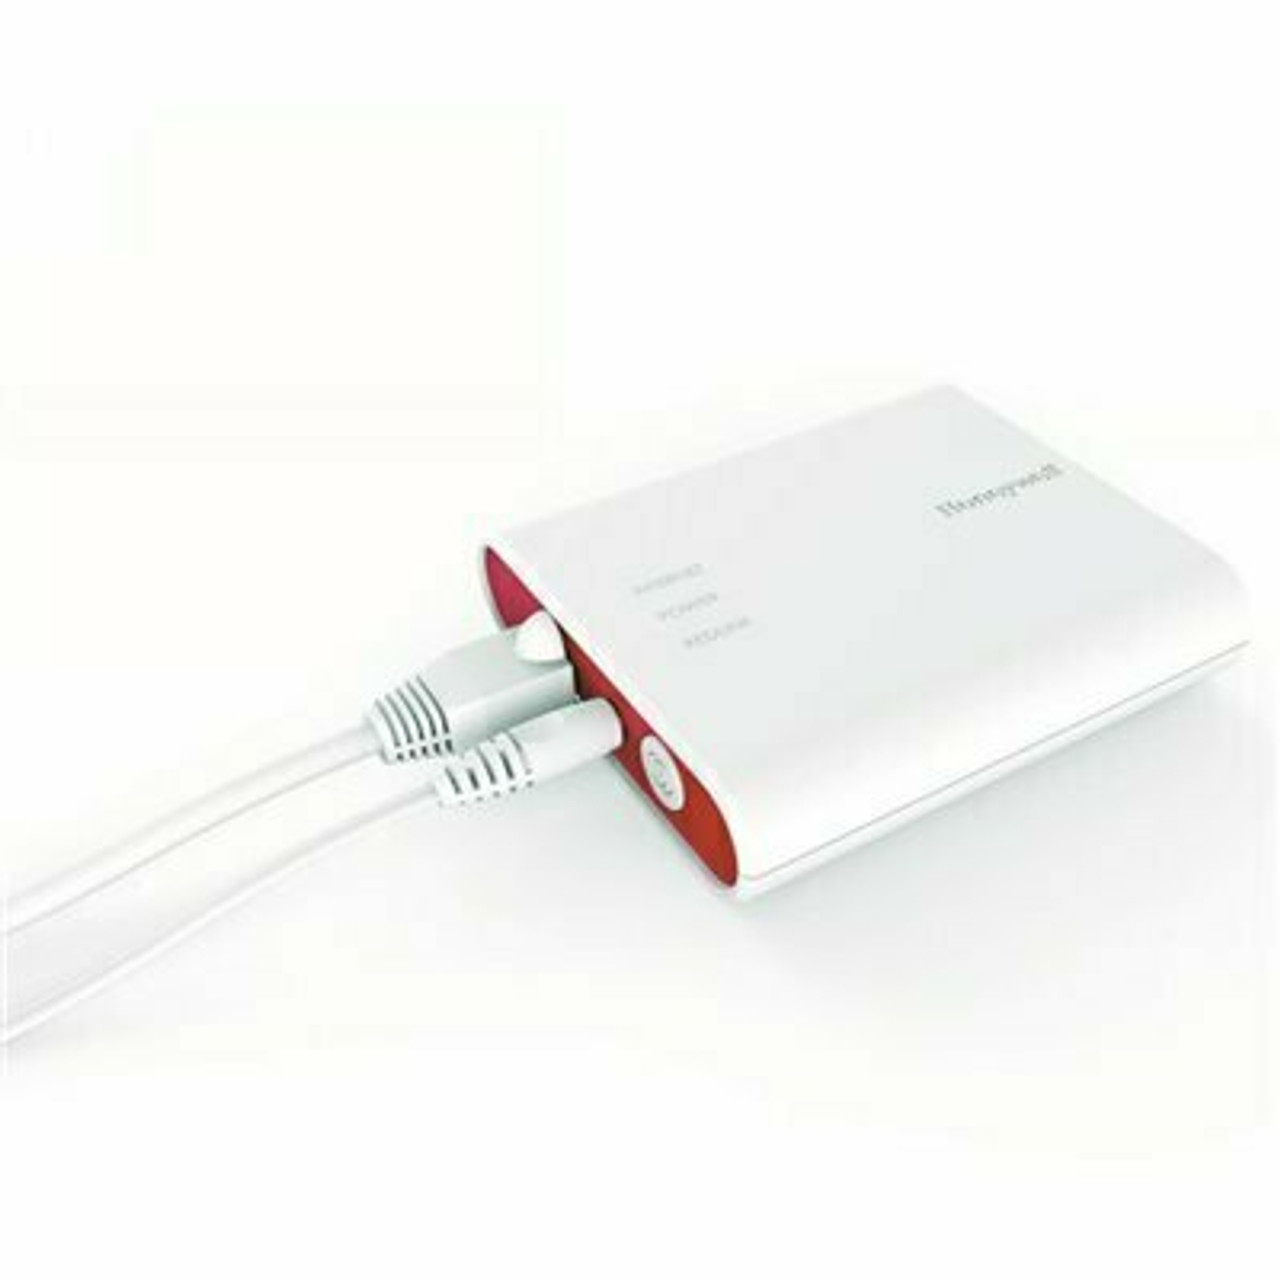 Honeywell Redlink Internet Gateway And Ethernet Cable And Power Cord